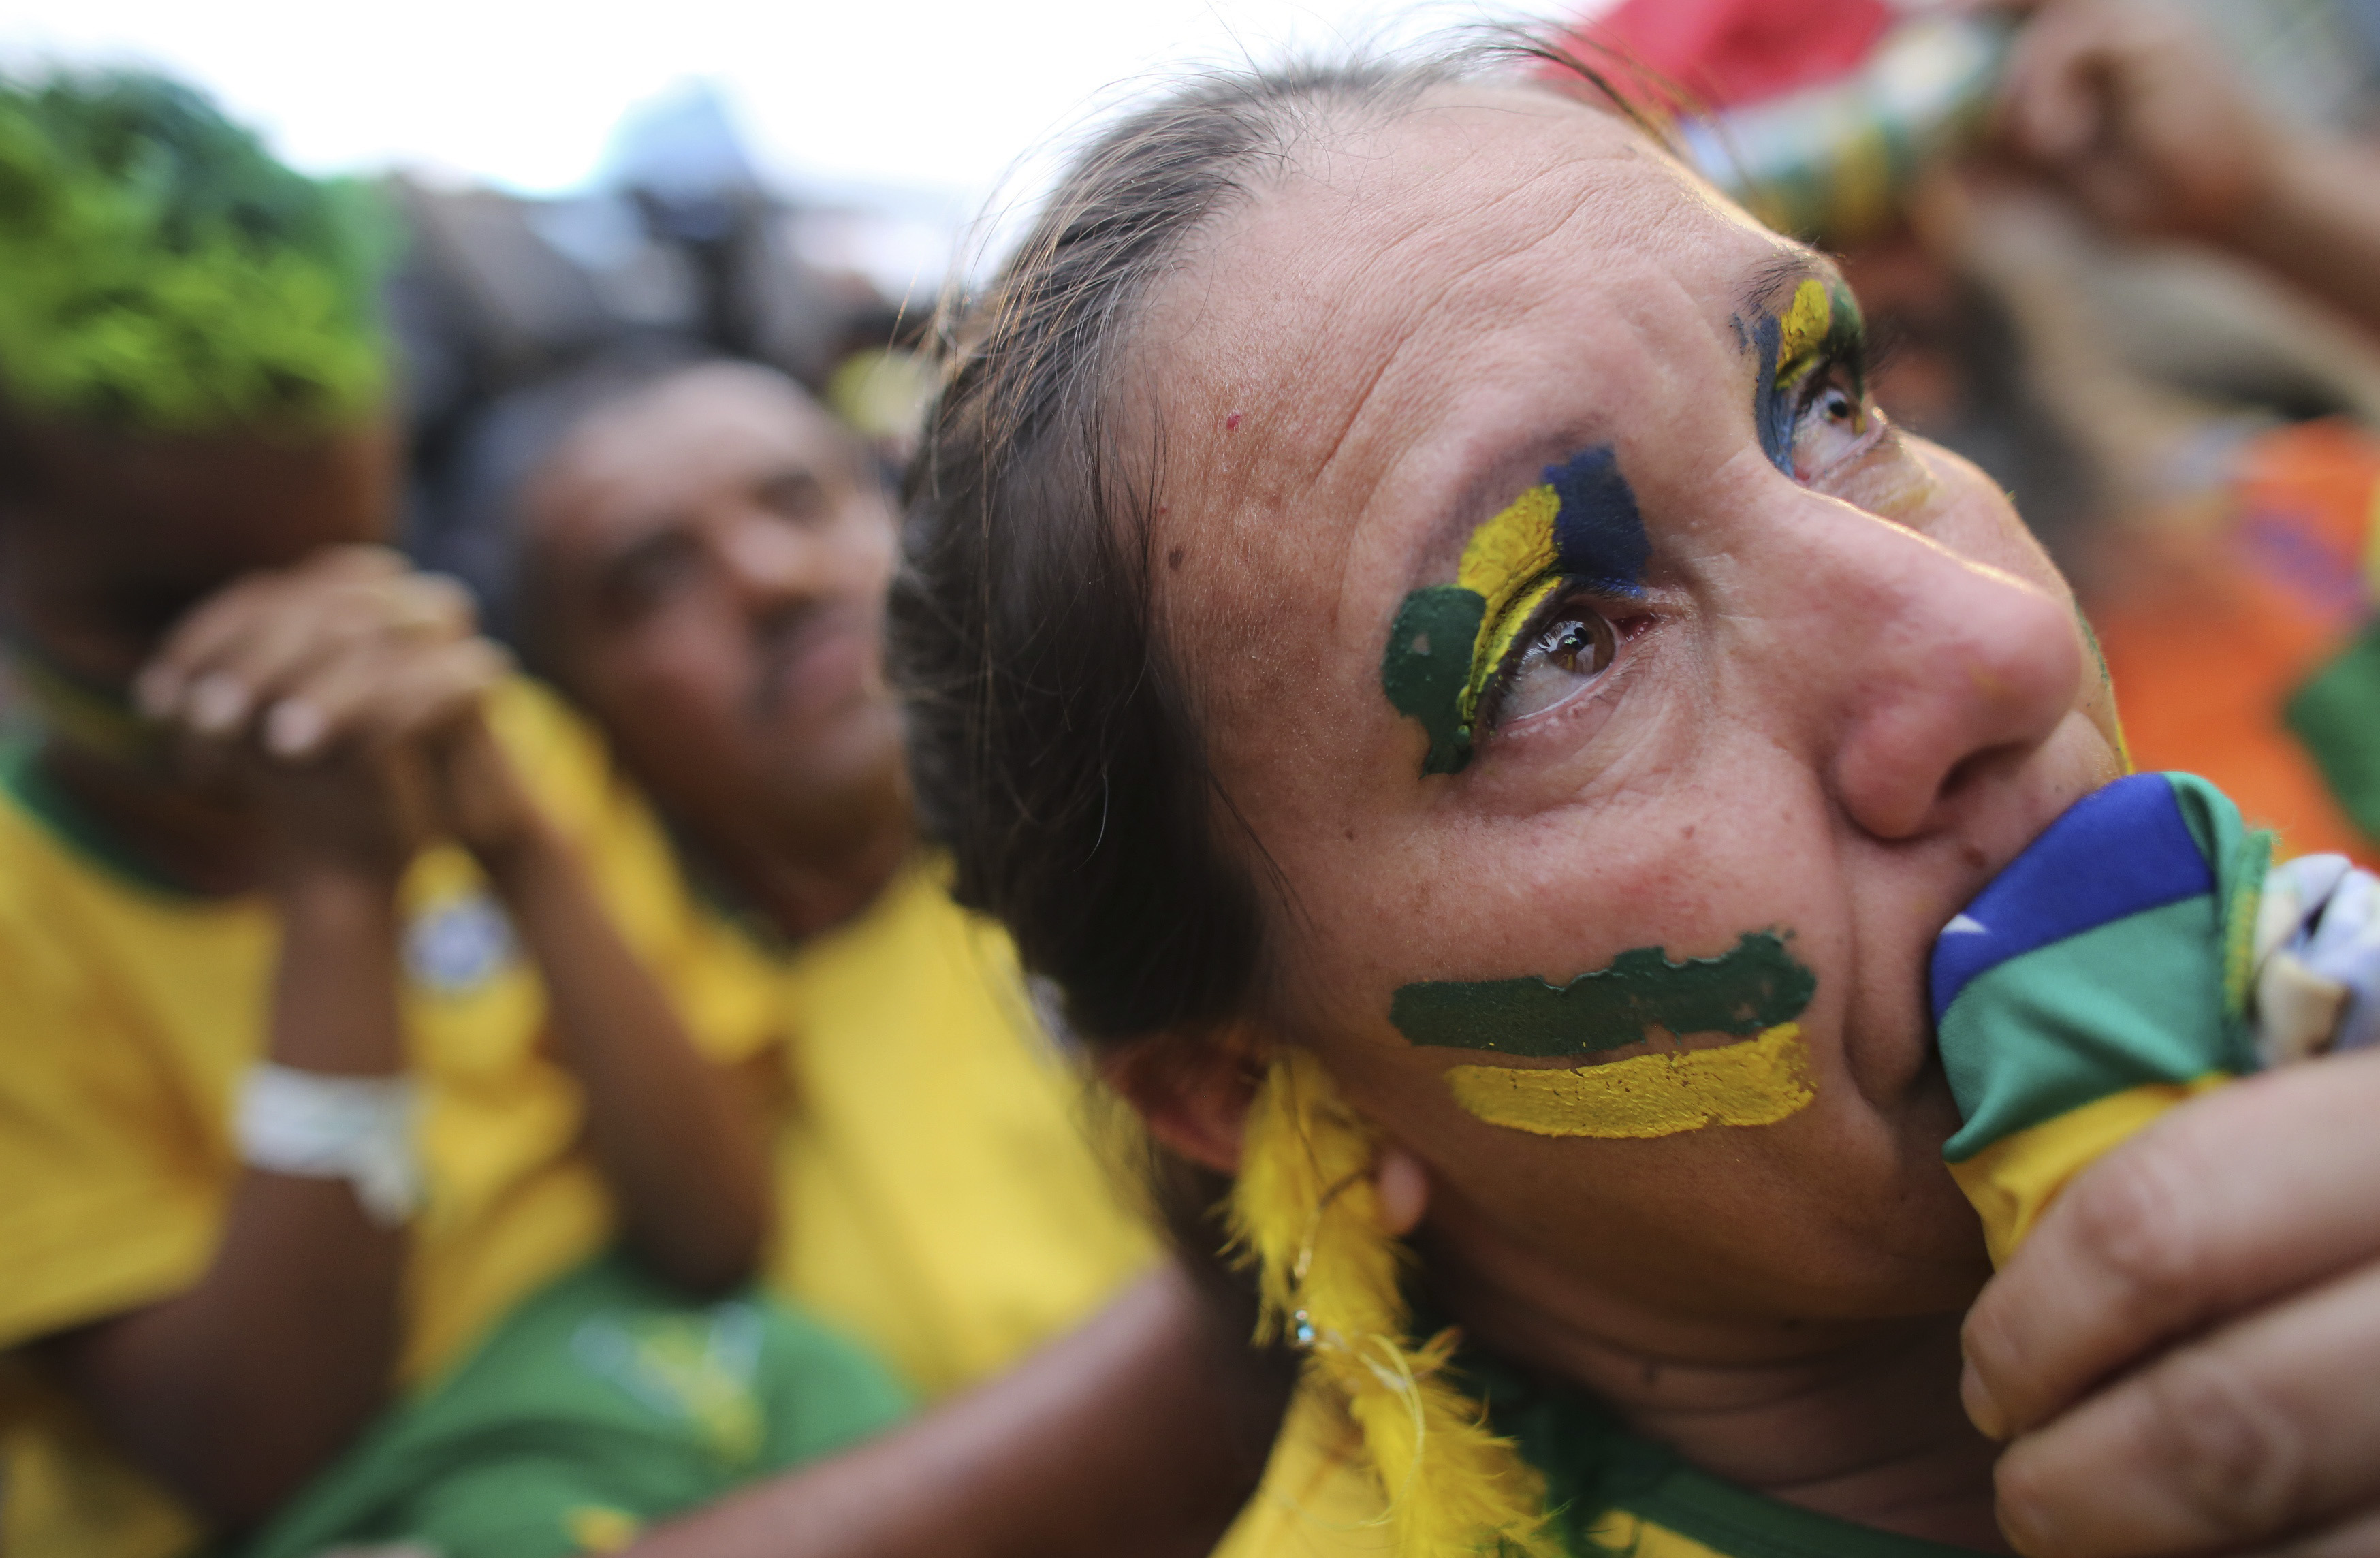 A Brazilian soccer fan cries as she watches the 2014 World Cup semi- final soccer match between Brazil and Germany in Sao Paulo 